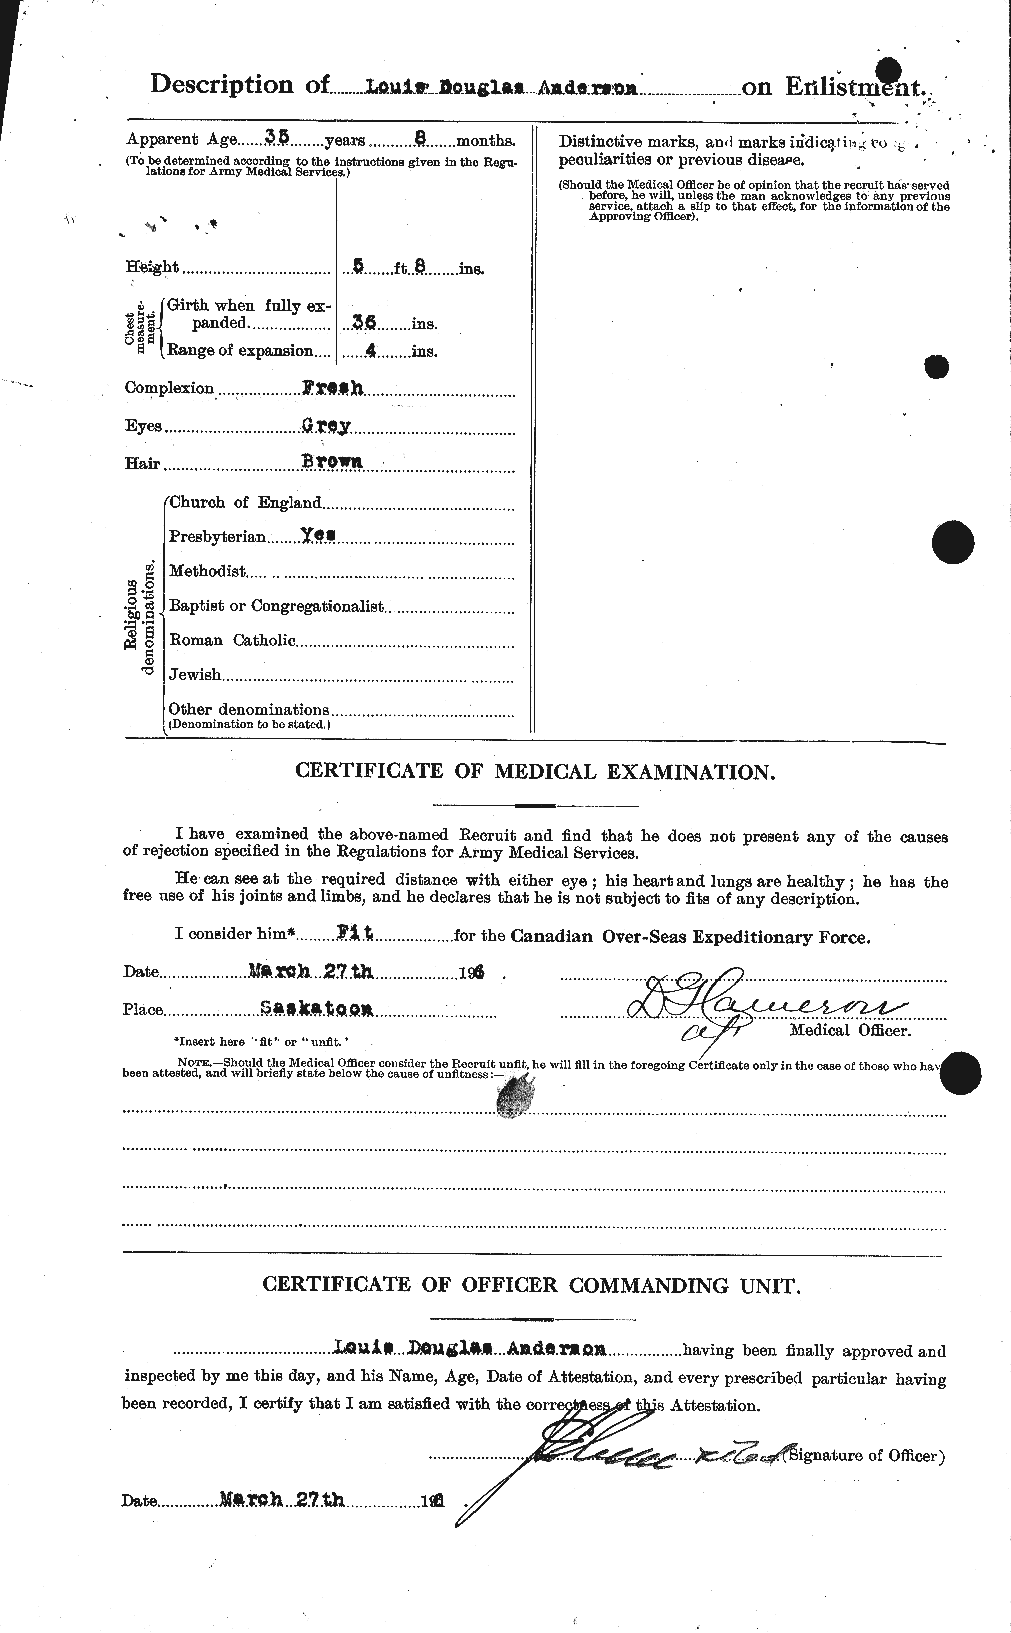 Personnel Records of the First World War - CEF 207498b